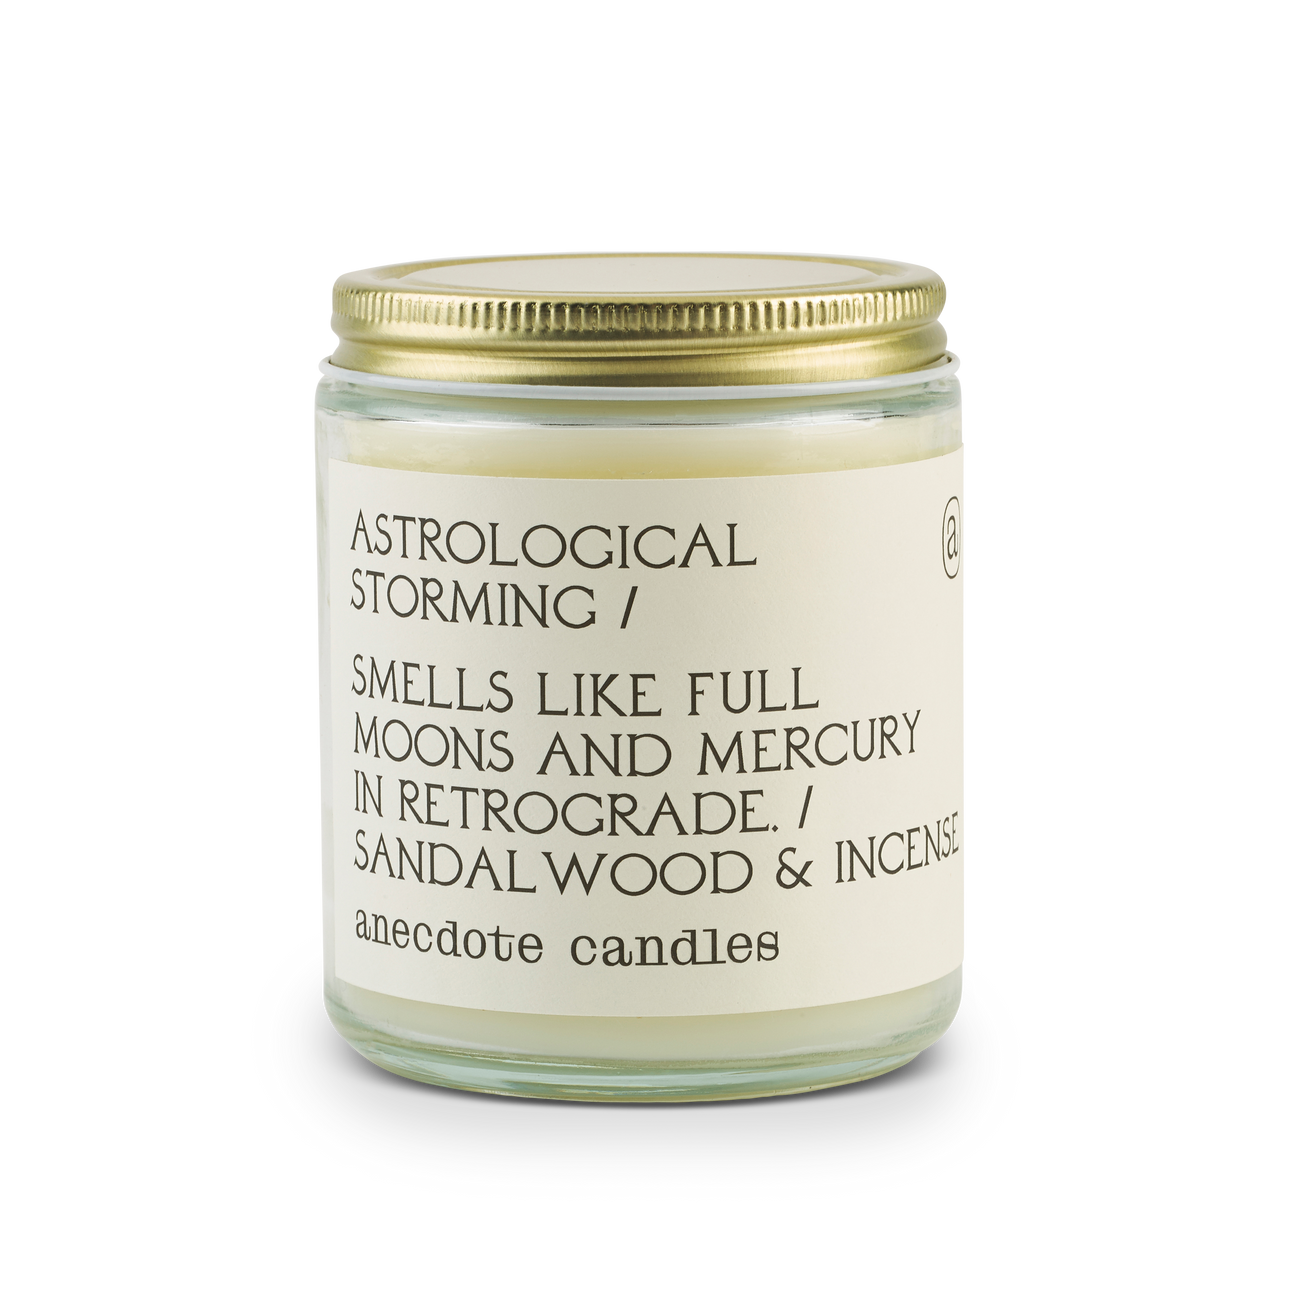 anecdote candles review